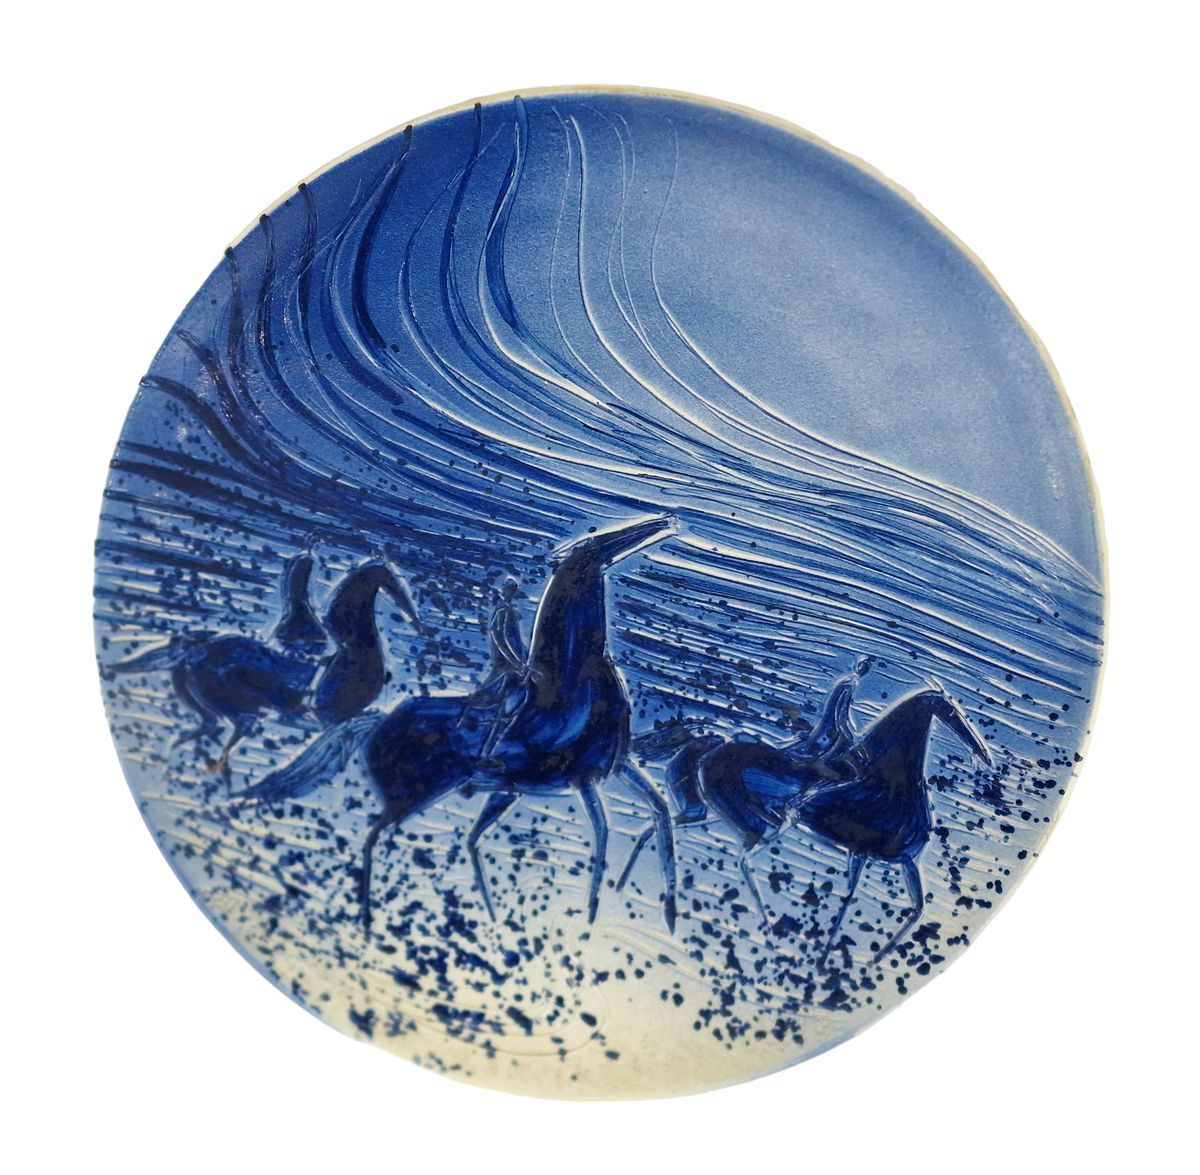 ANDRE BRASILIER (1929) Three riders on the beach
Ceramic dish with white and blu&hellip;